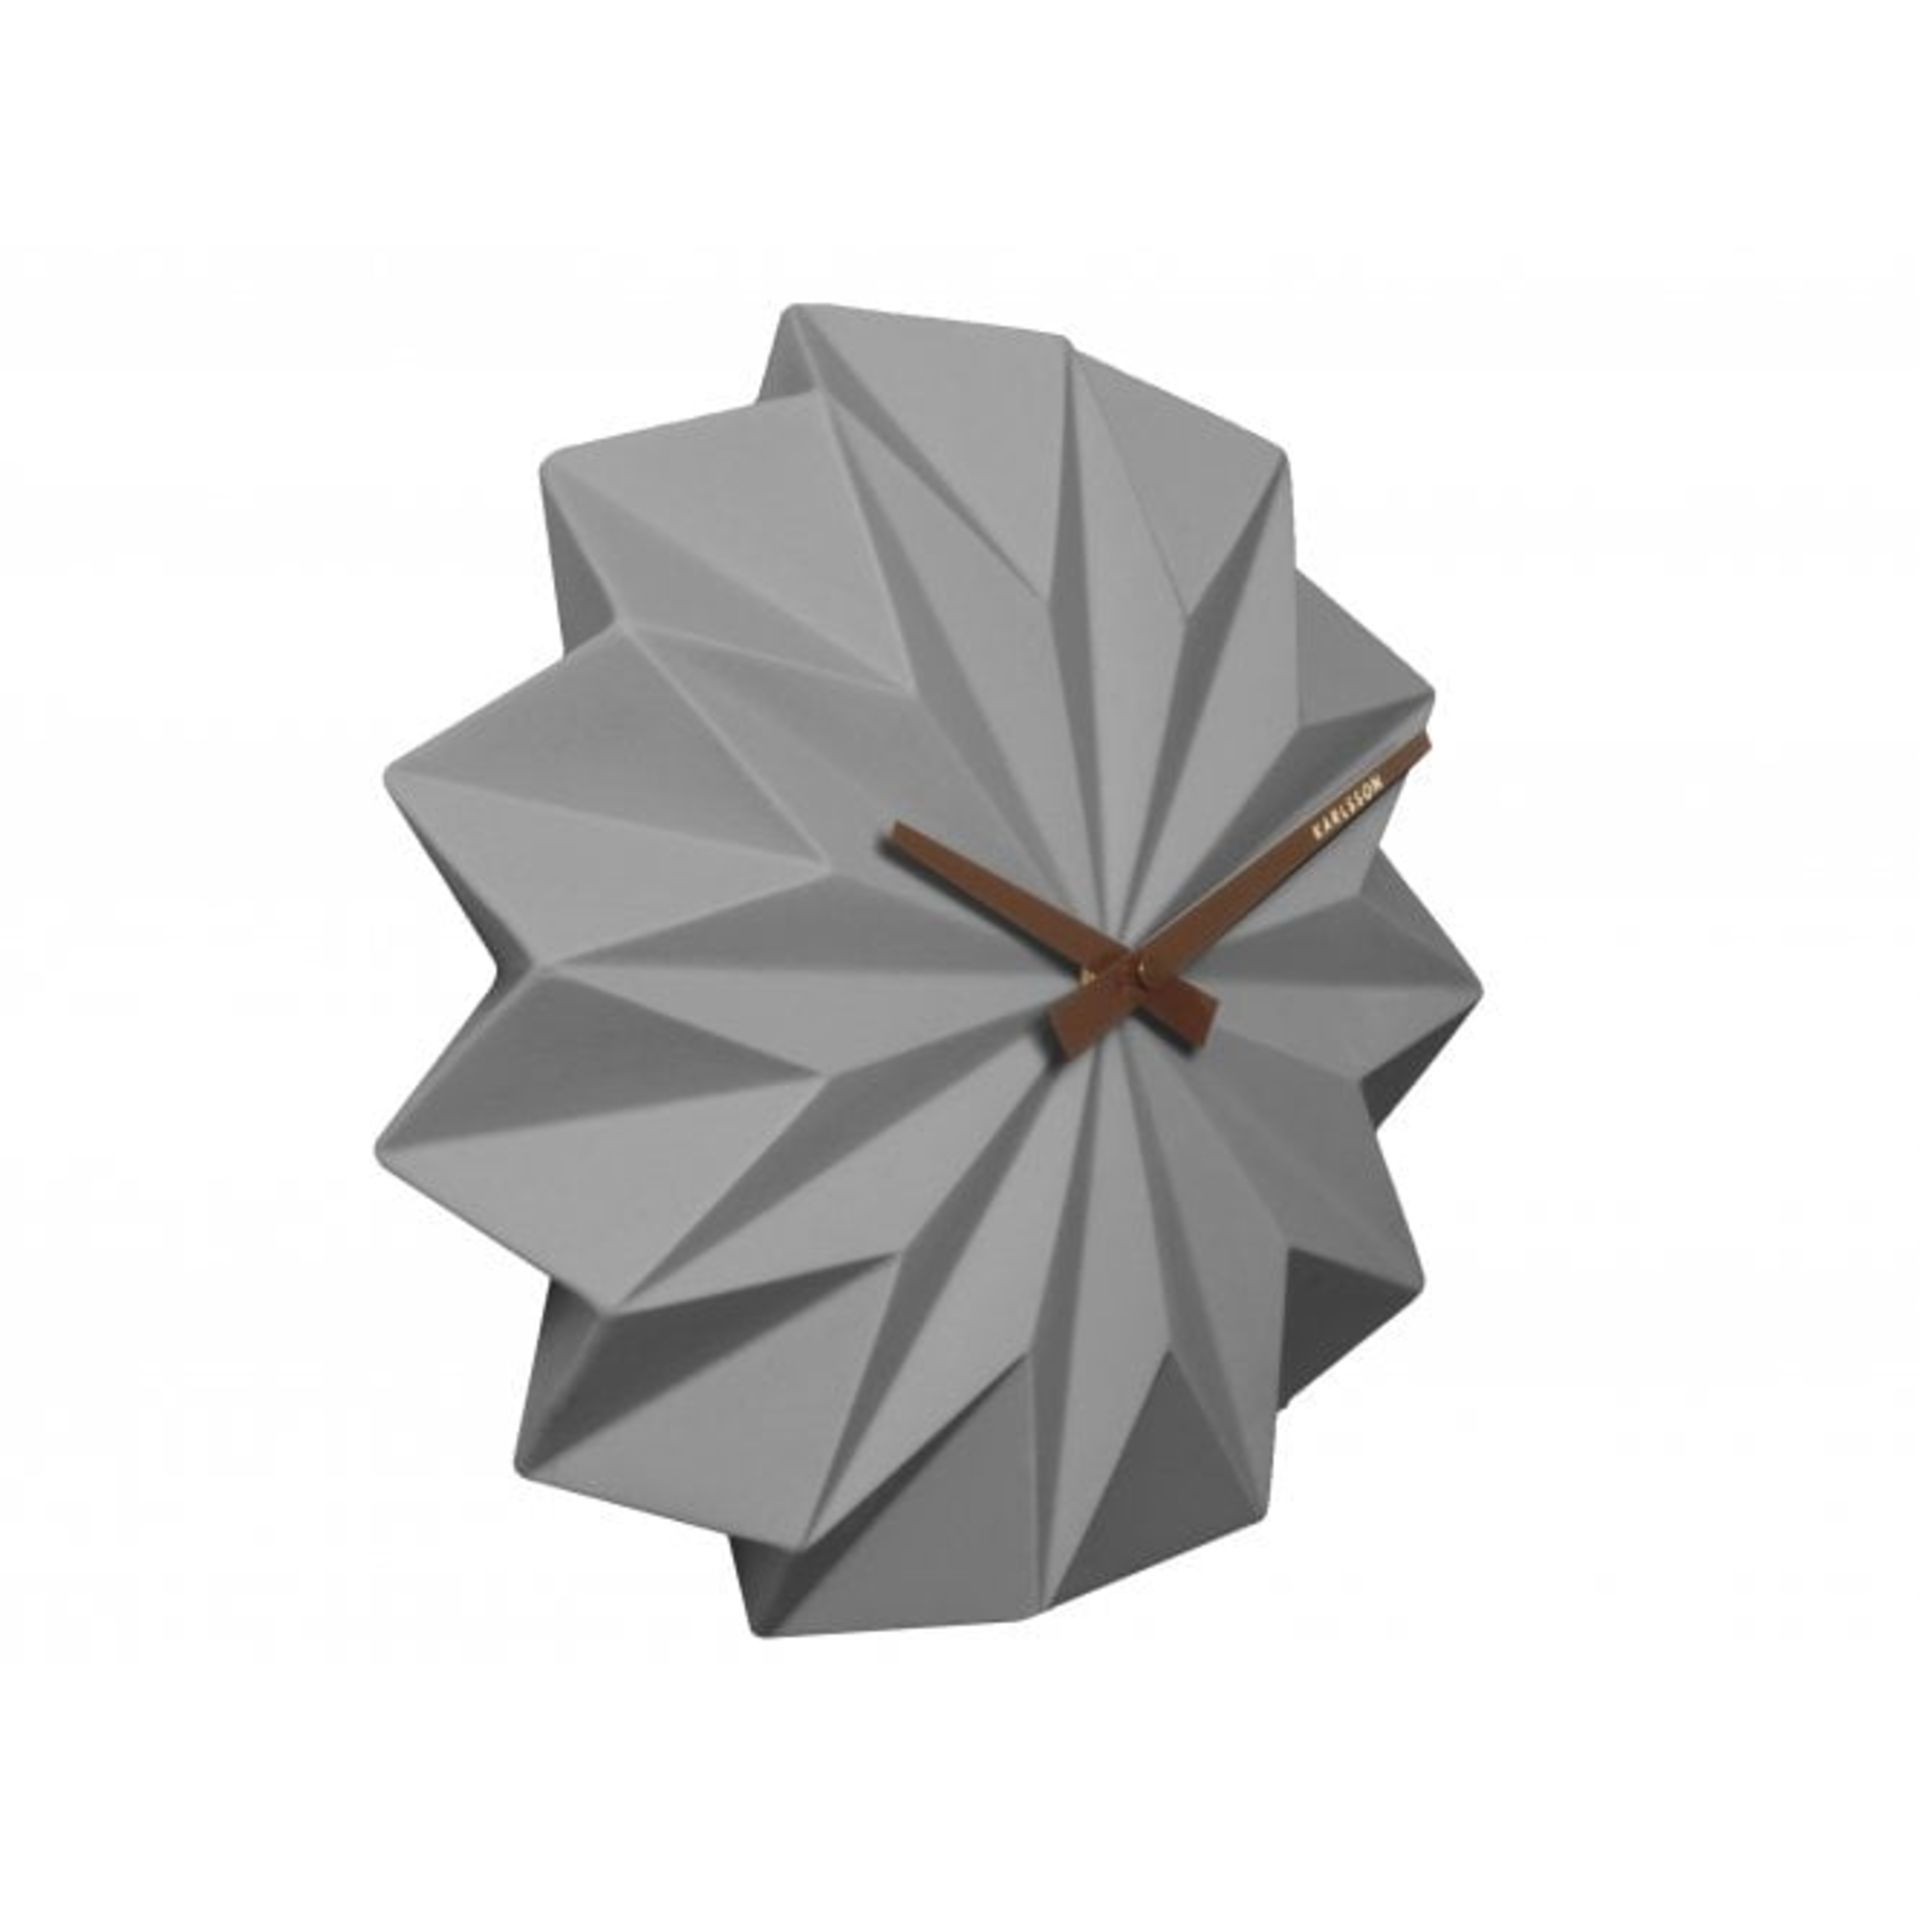 1 x Karlsson Origami Wall Clock - Ceramic Wall Clock in Grey With 27 cms Diameter - Brand New and - Image 3 of 3